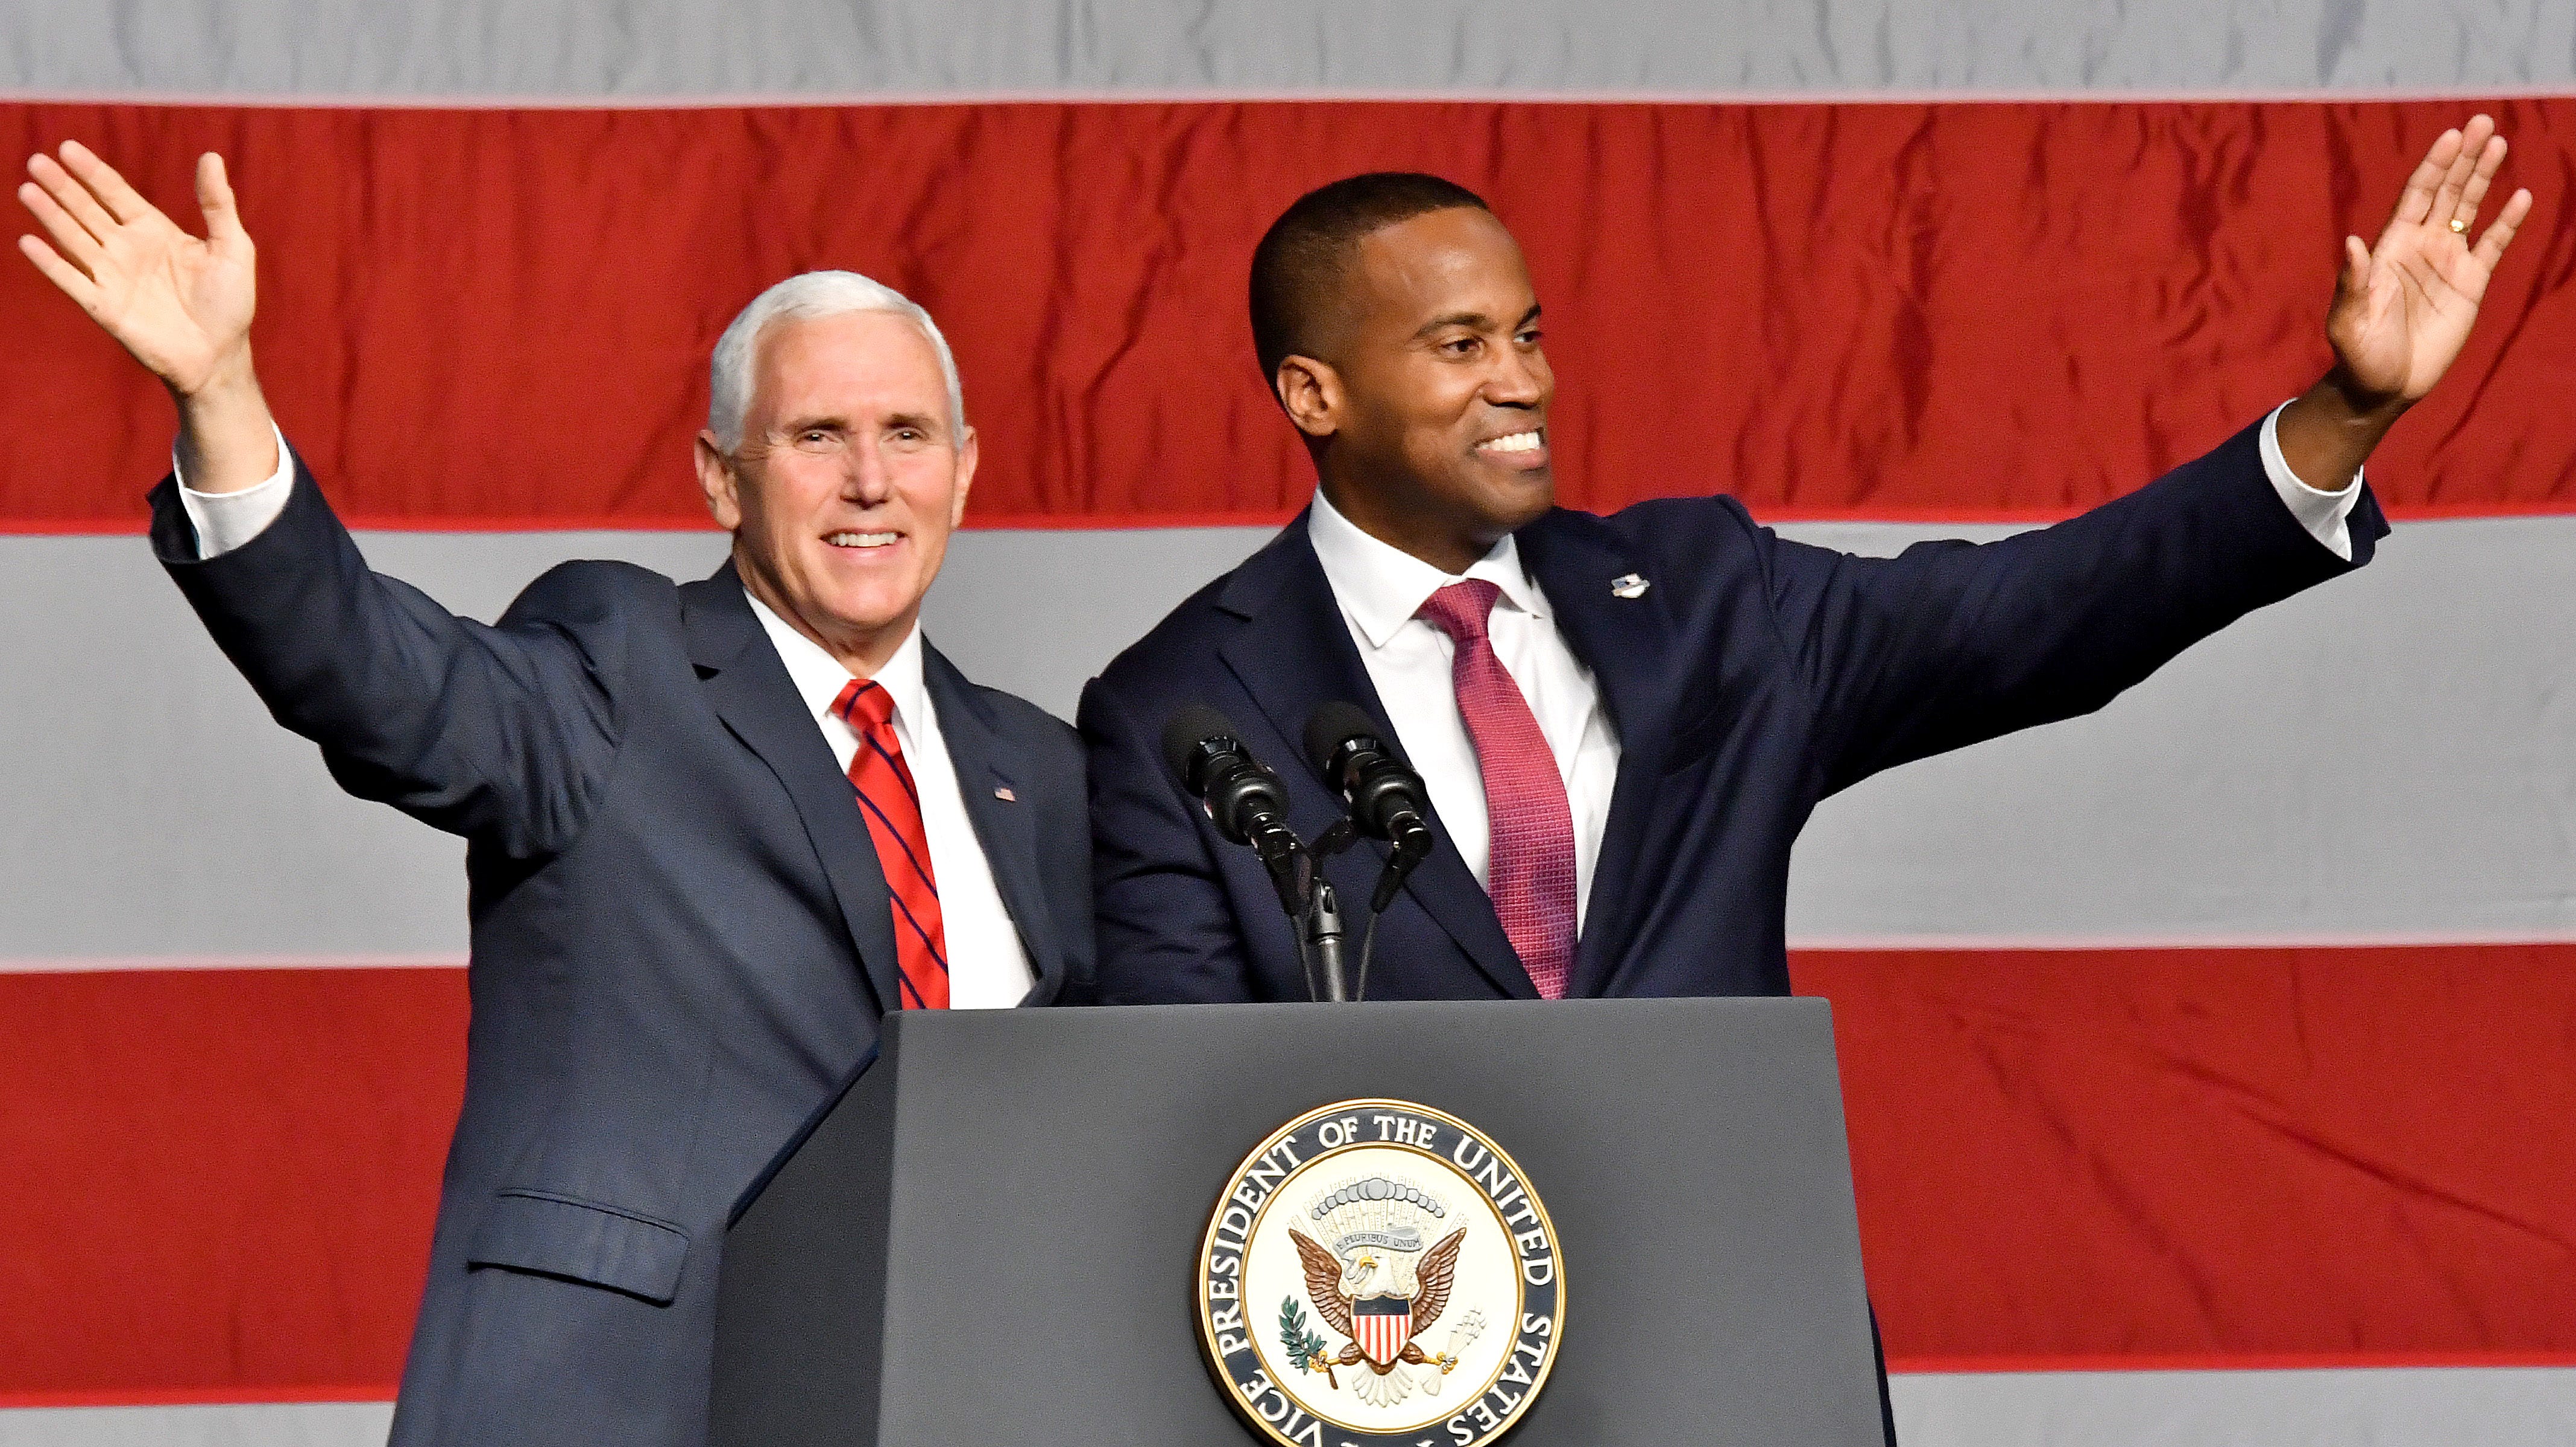 John James and  Vice President Mike Pence wave to the crowd.